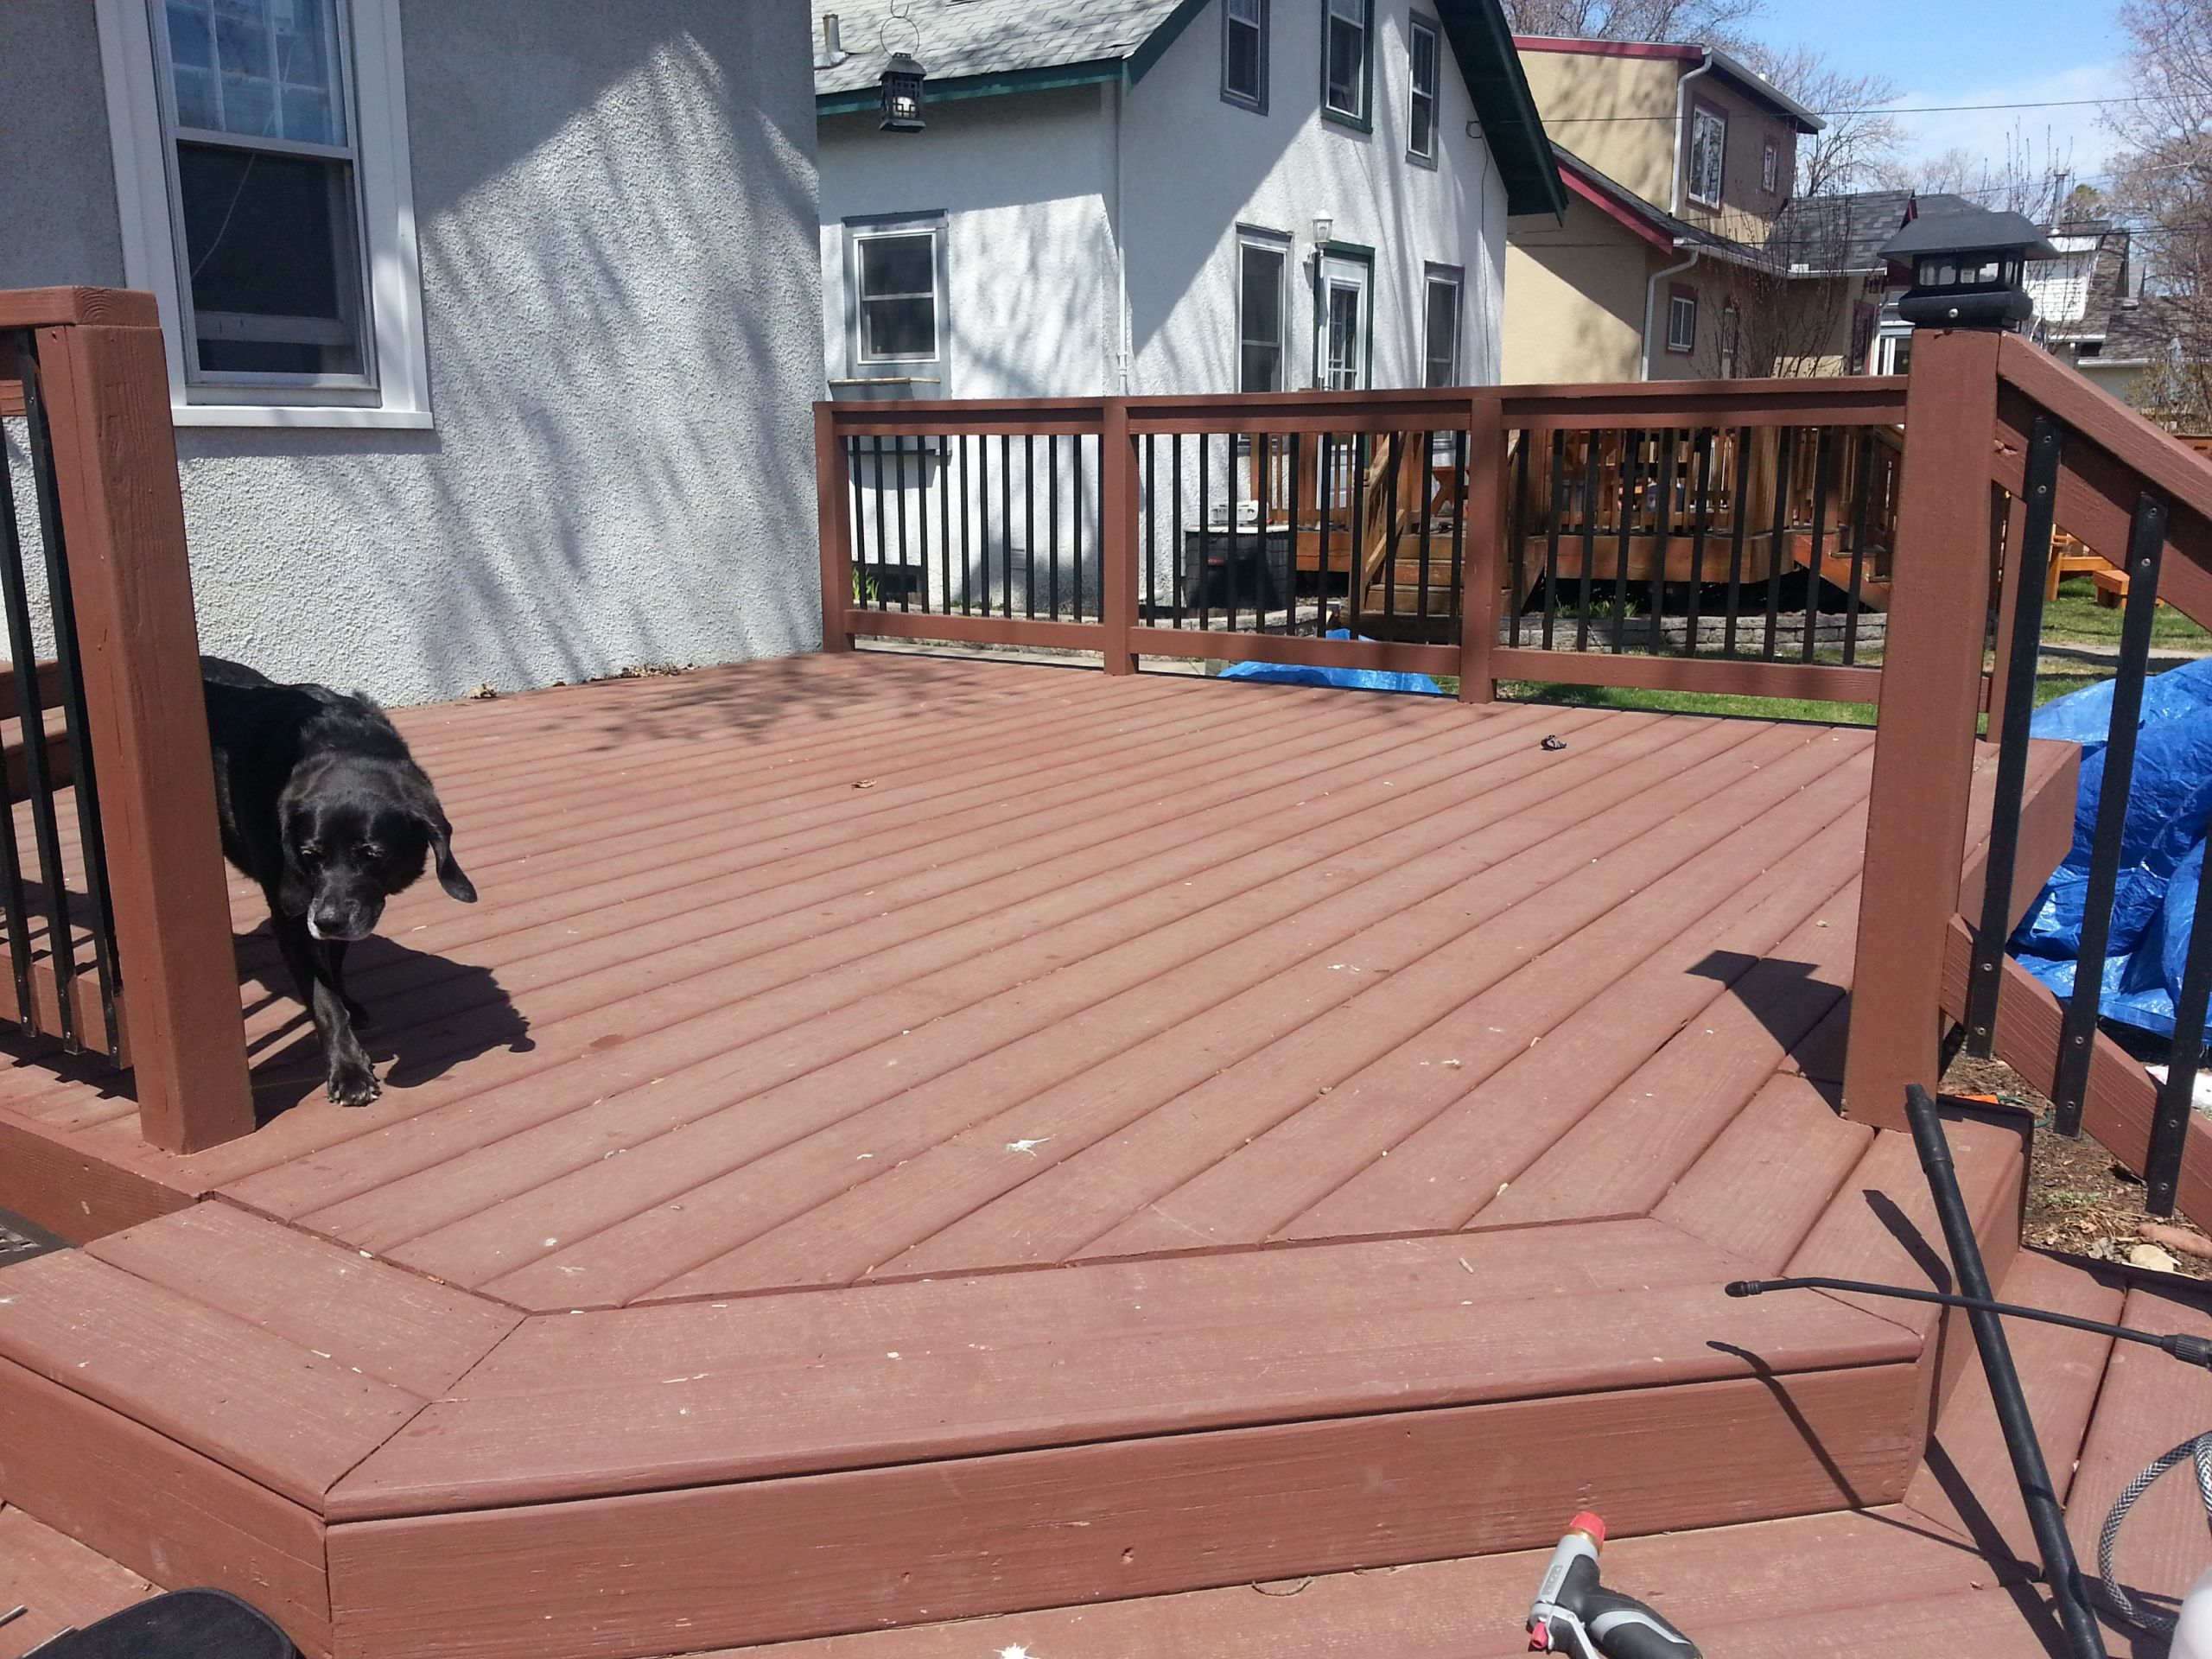 Behr Deck Over Paint Reviews
 Decking Nice Outdoor Home Design With Behr Deck Paint